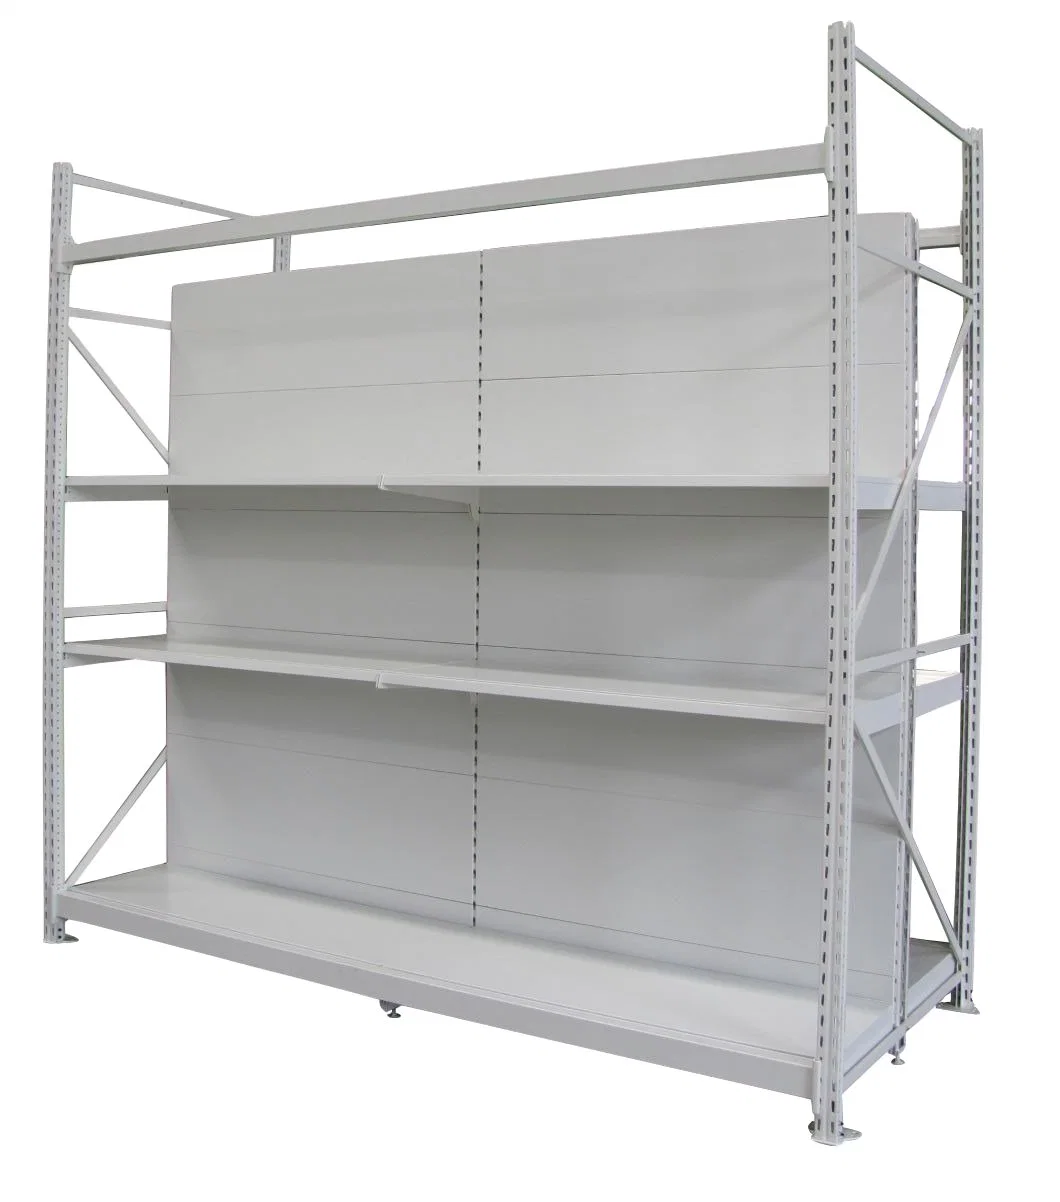 Double-Sided Multifunctional Supermarket Shelf Display for Supermarket and Shop